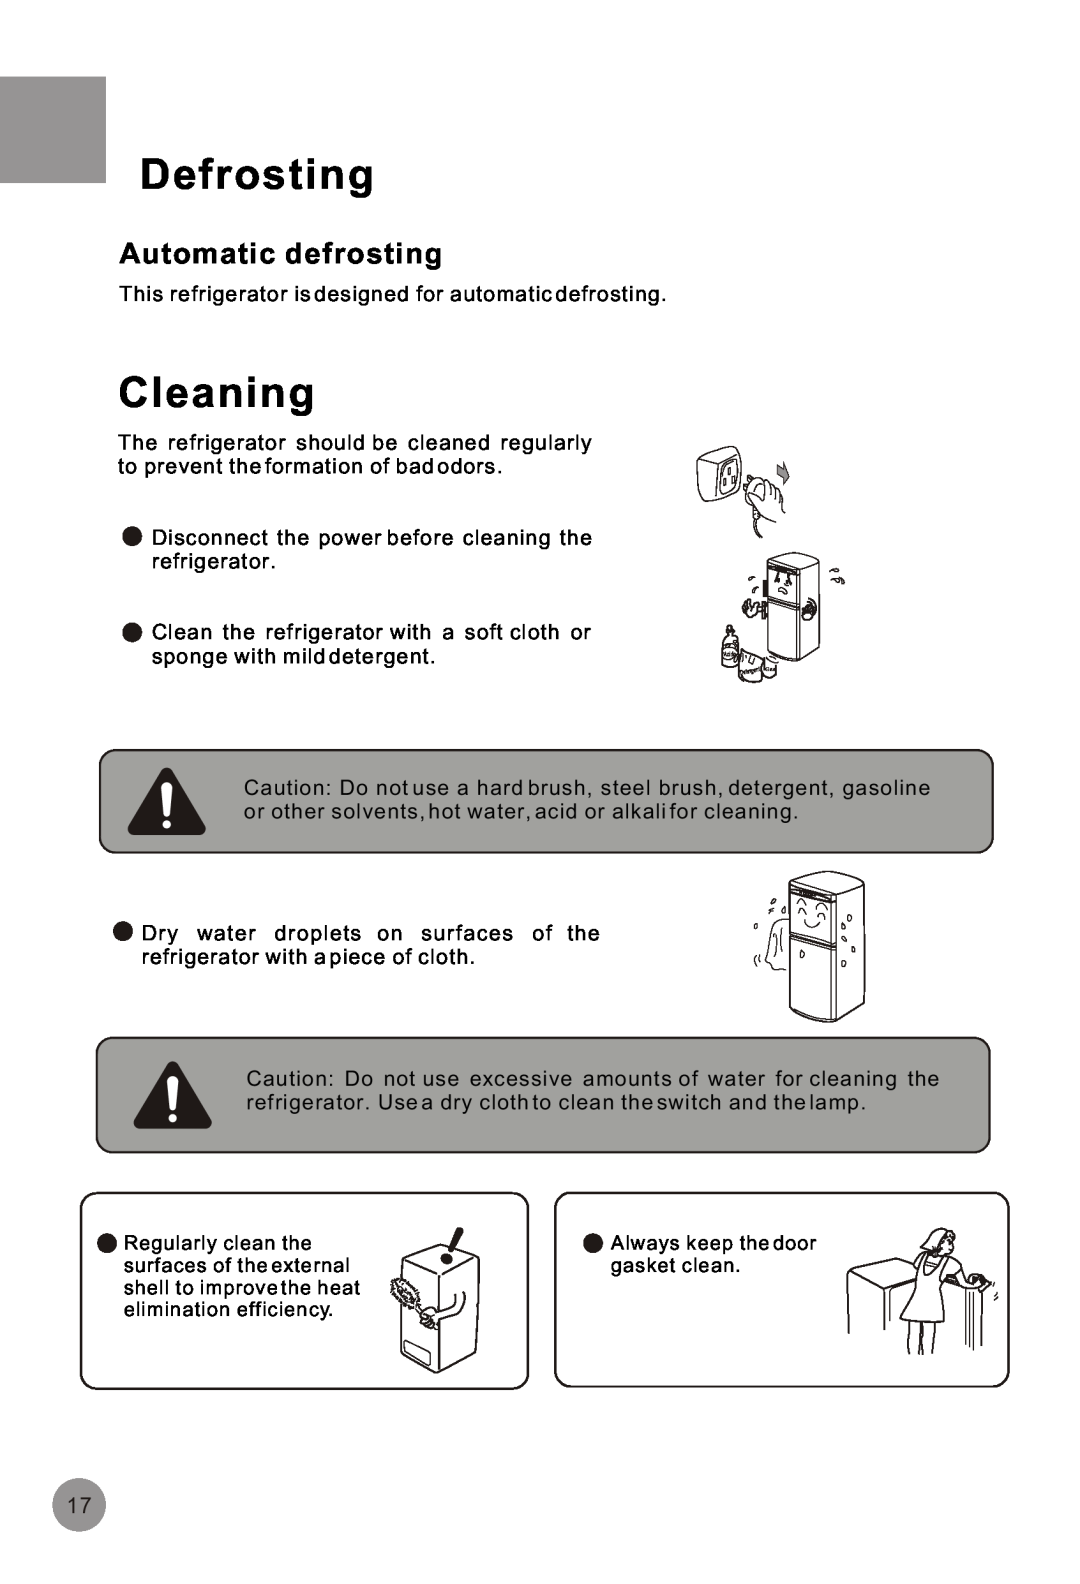 Haier HRF-516FKA operation manual Defrosting, Cleaning, Automatic defrosting 